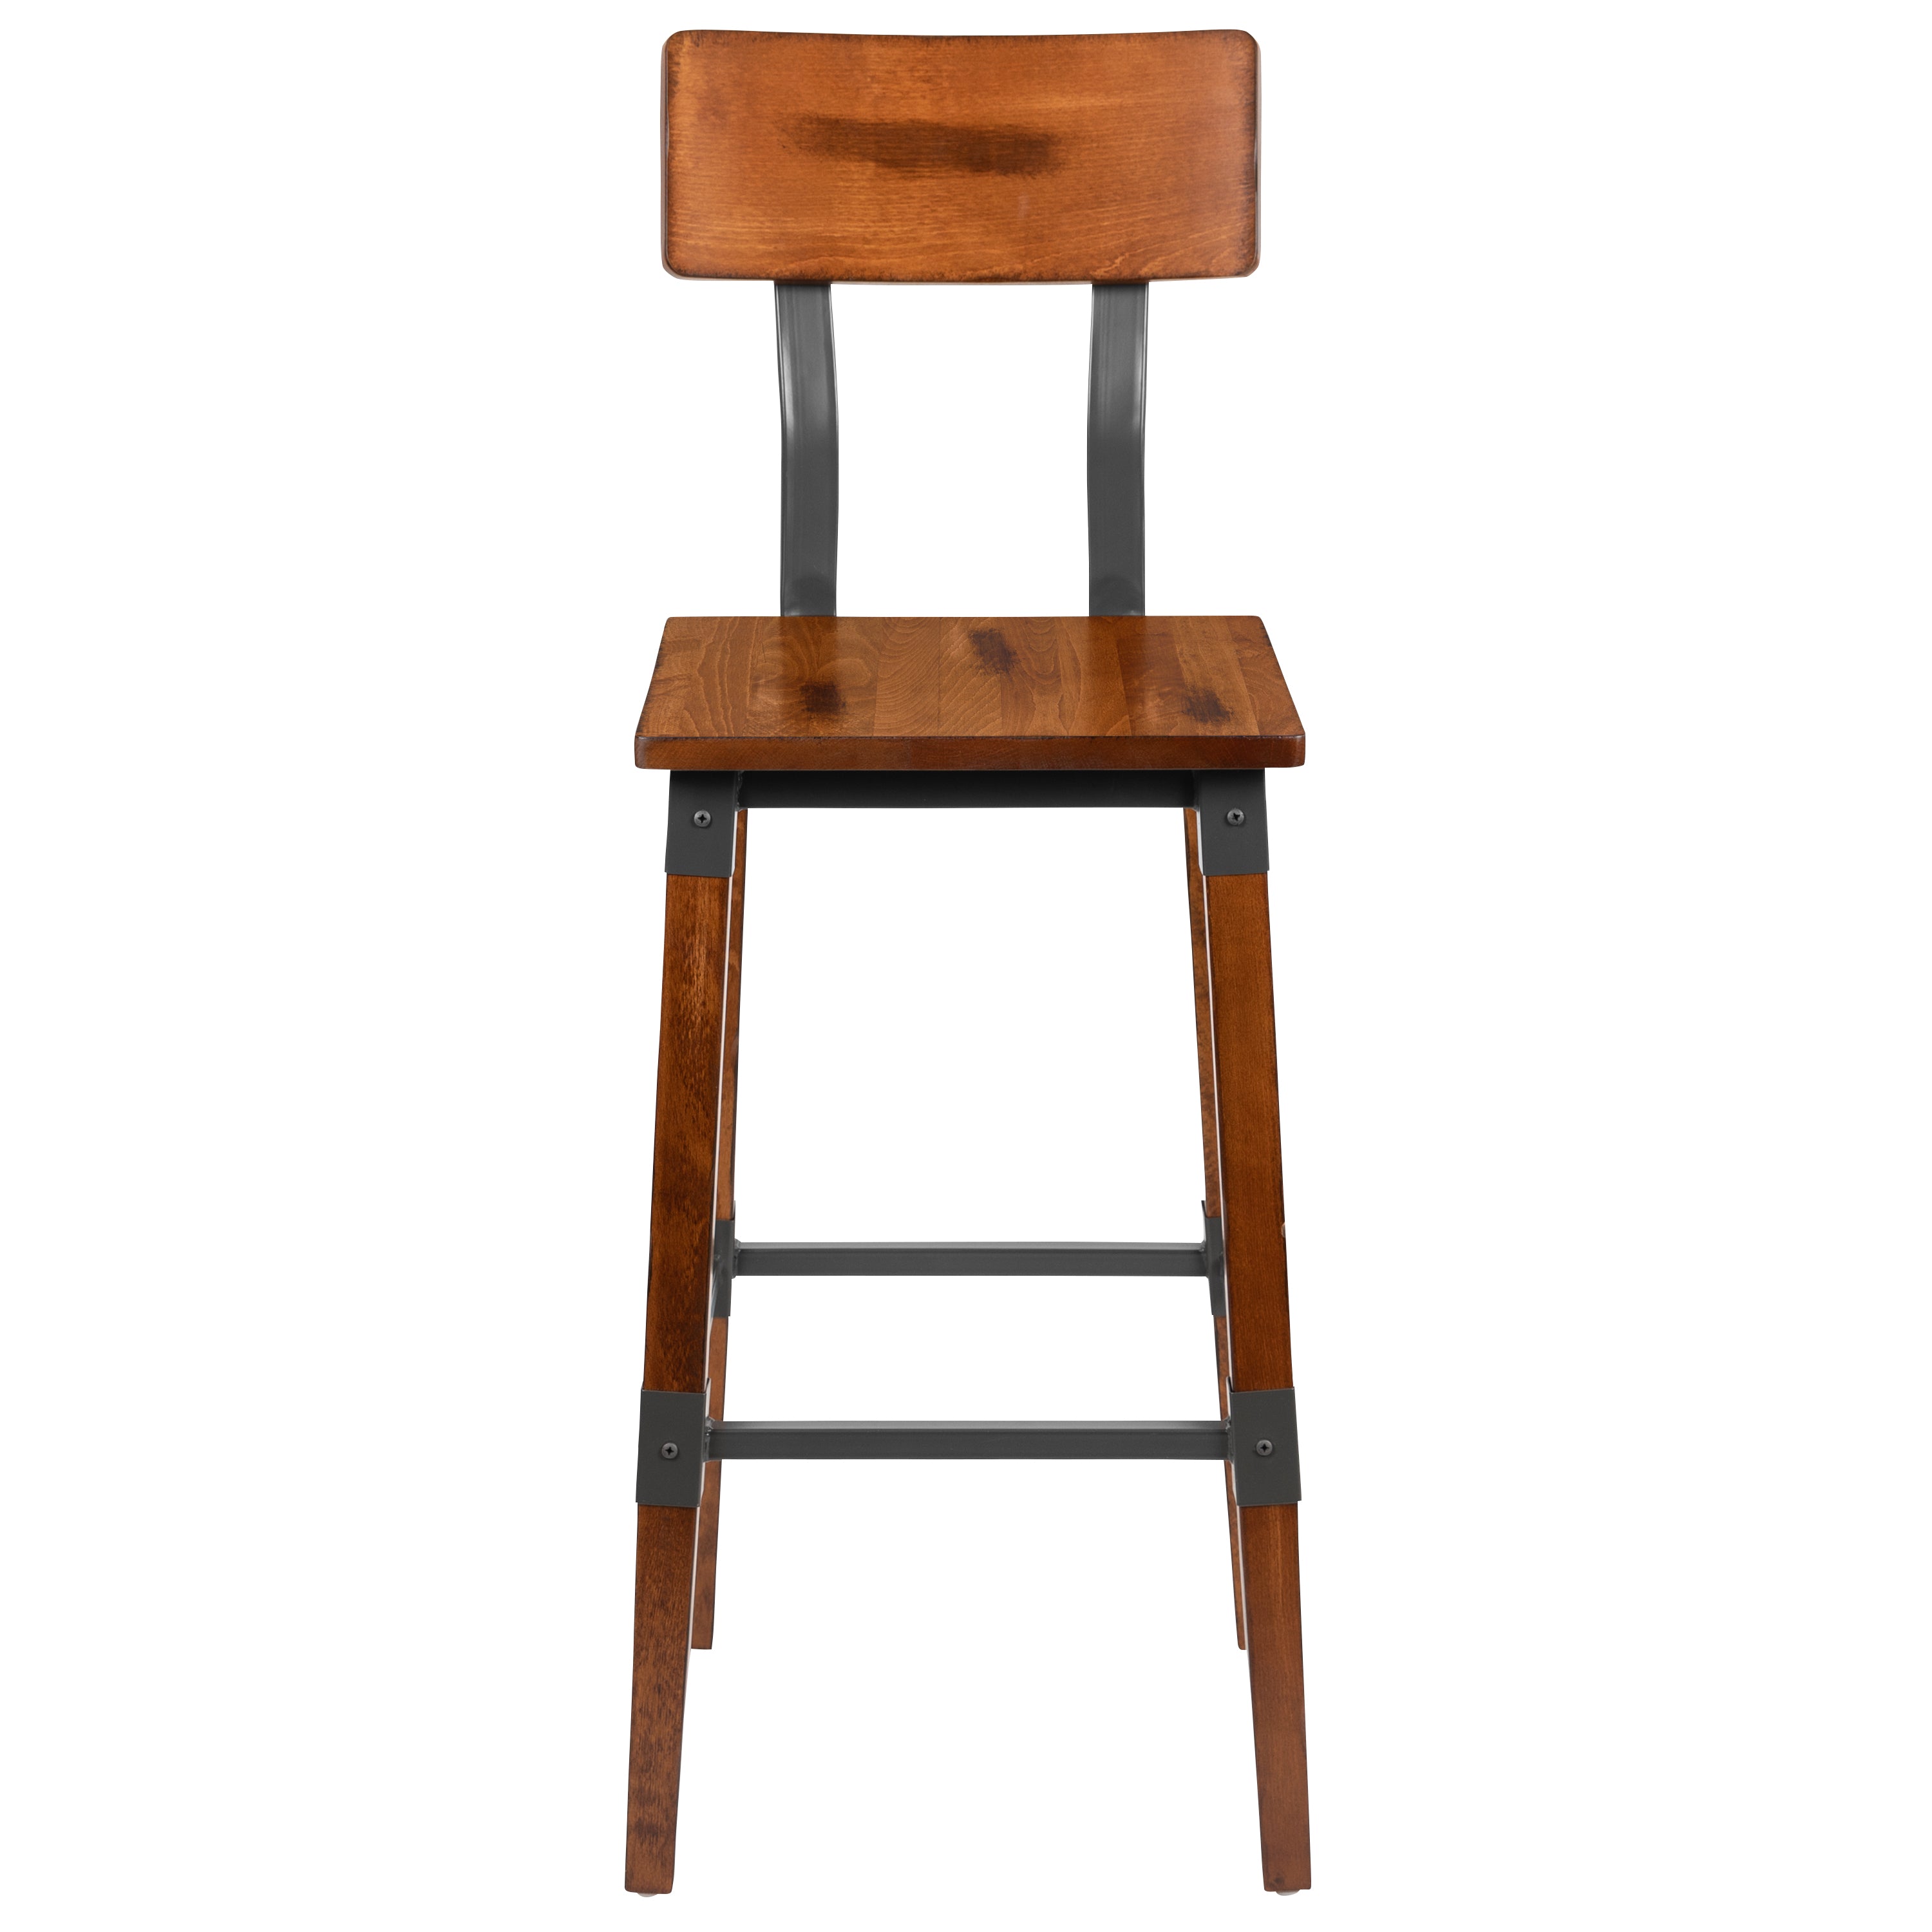 2 Pack Rustic Antique Industrial Wood Dining Barstool-Bar Stool-Flash Furniture-Wall2Wall Furnishings